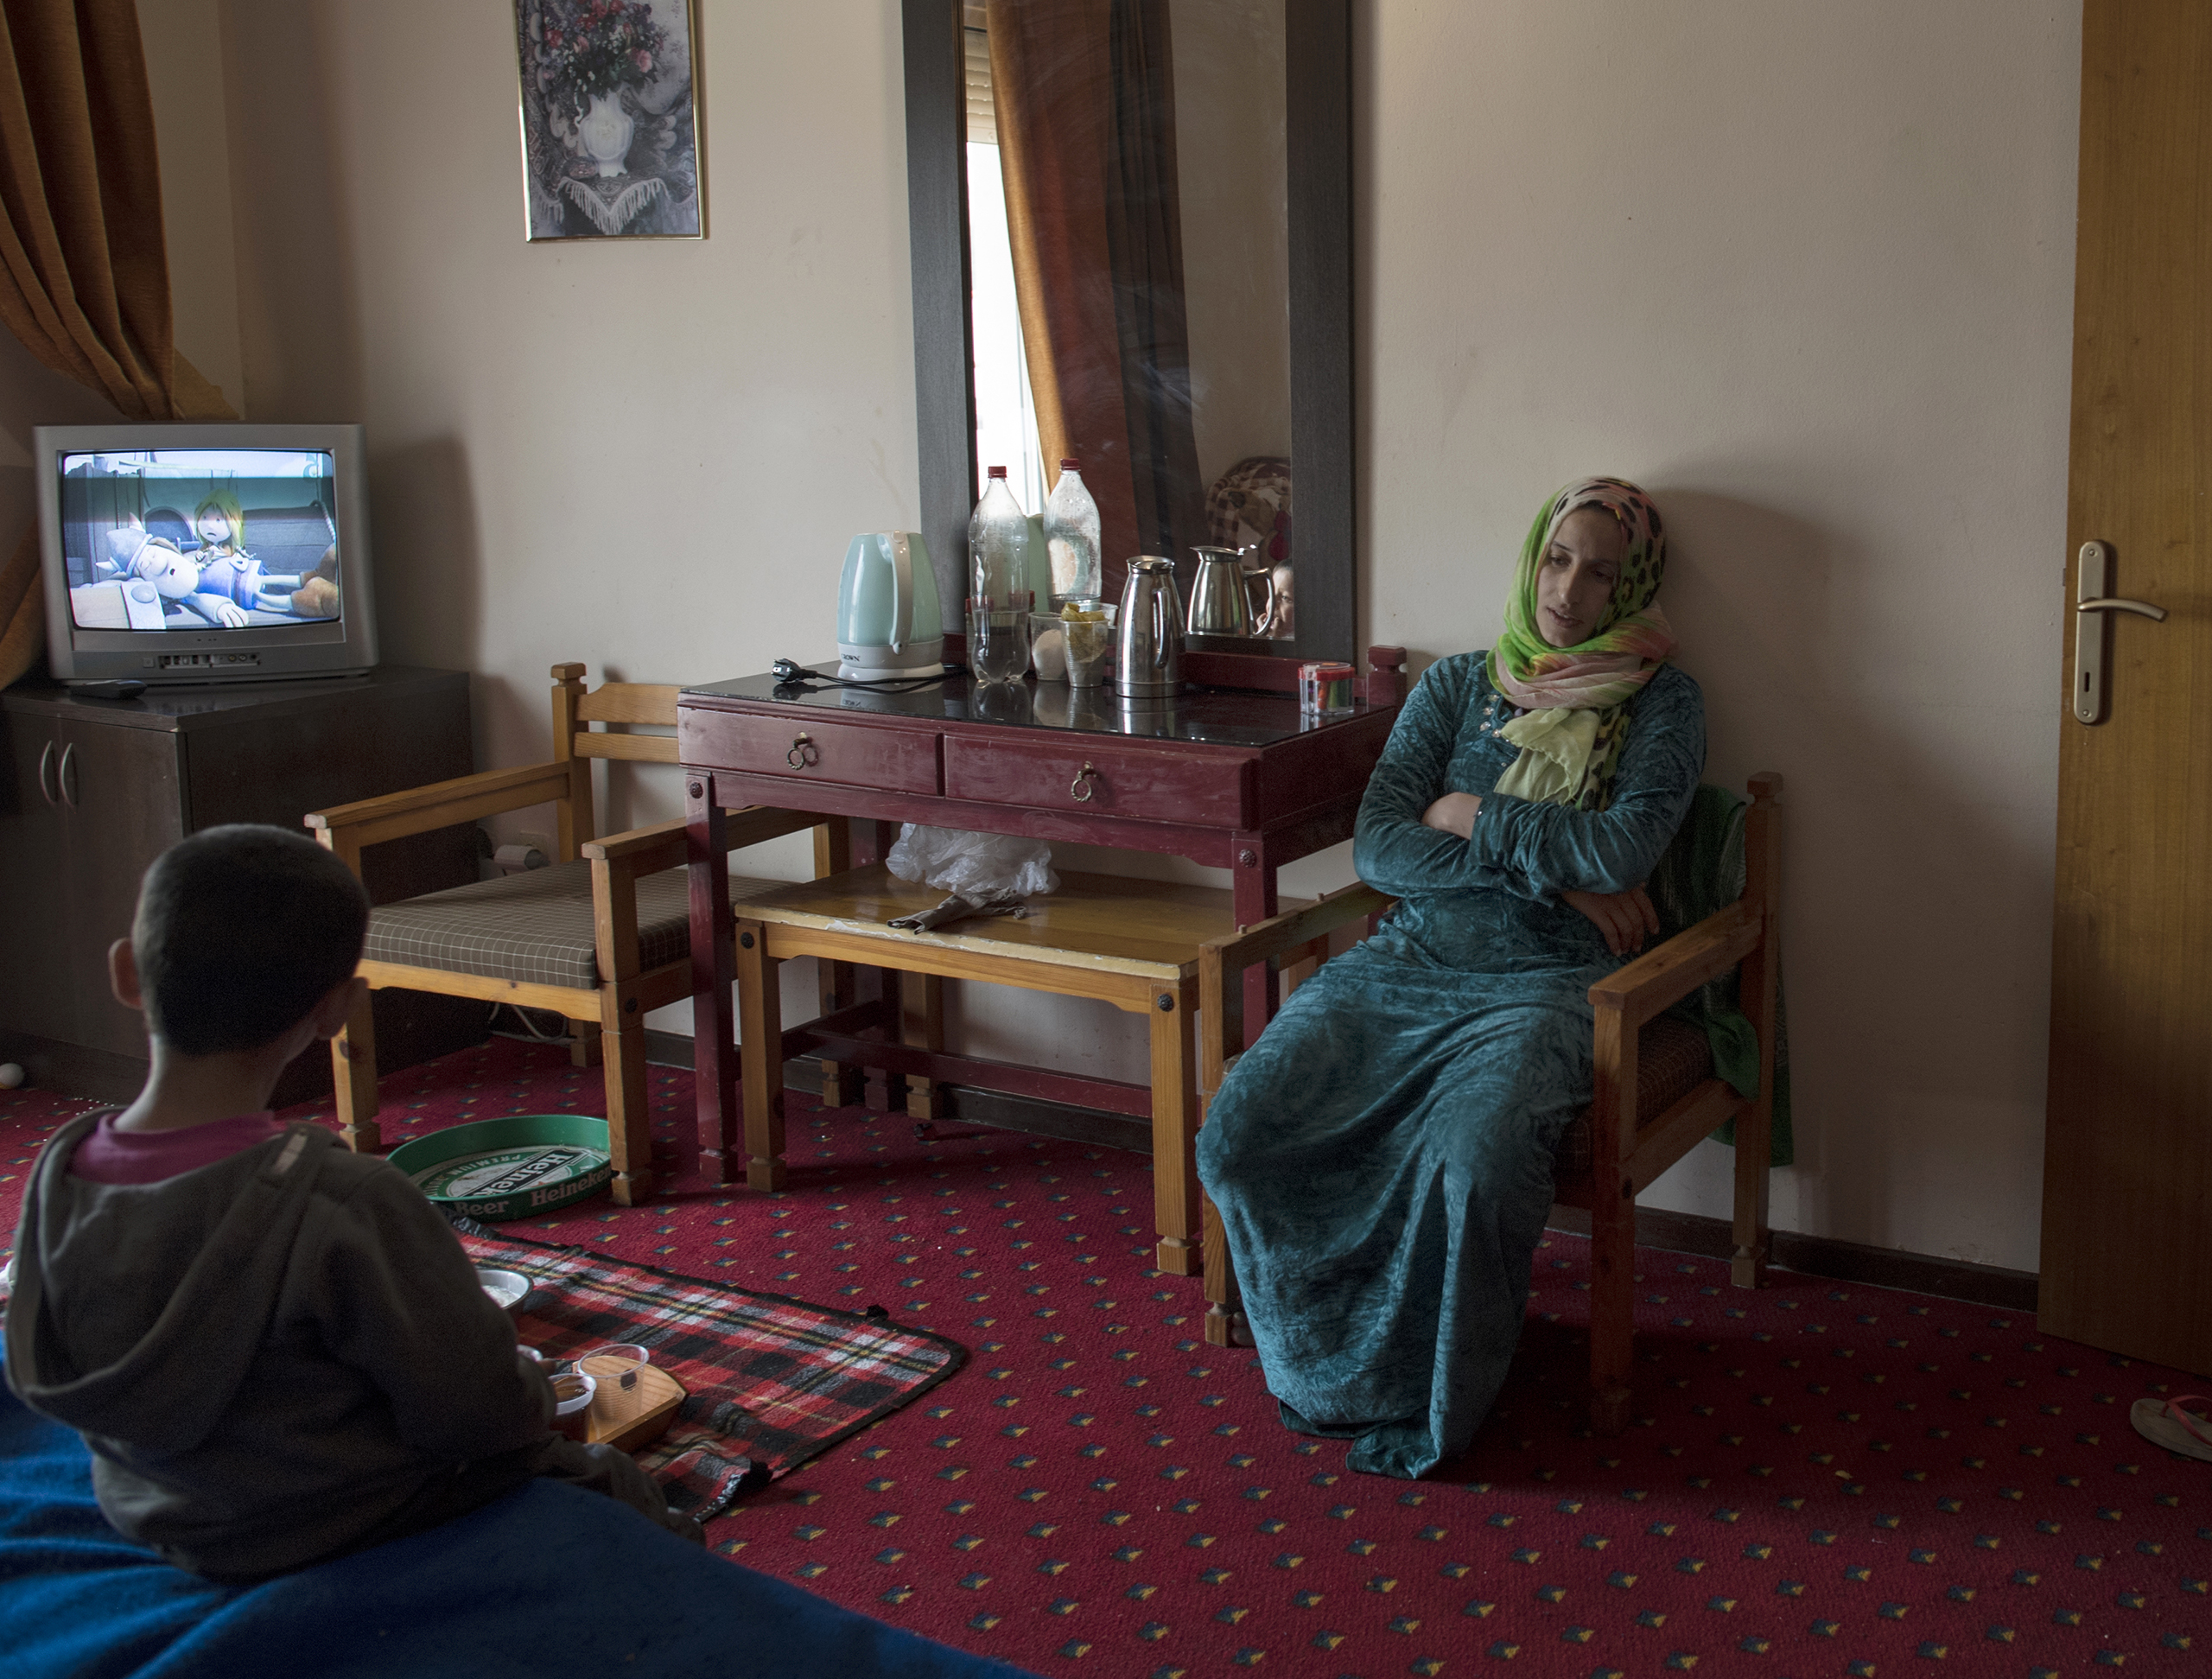 27-year-old Illham Saleh rests for a moment while her third son, Saleh, watches television, at a hotel in kastoria, Greece, near the Albanian border, March 27, 2017.